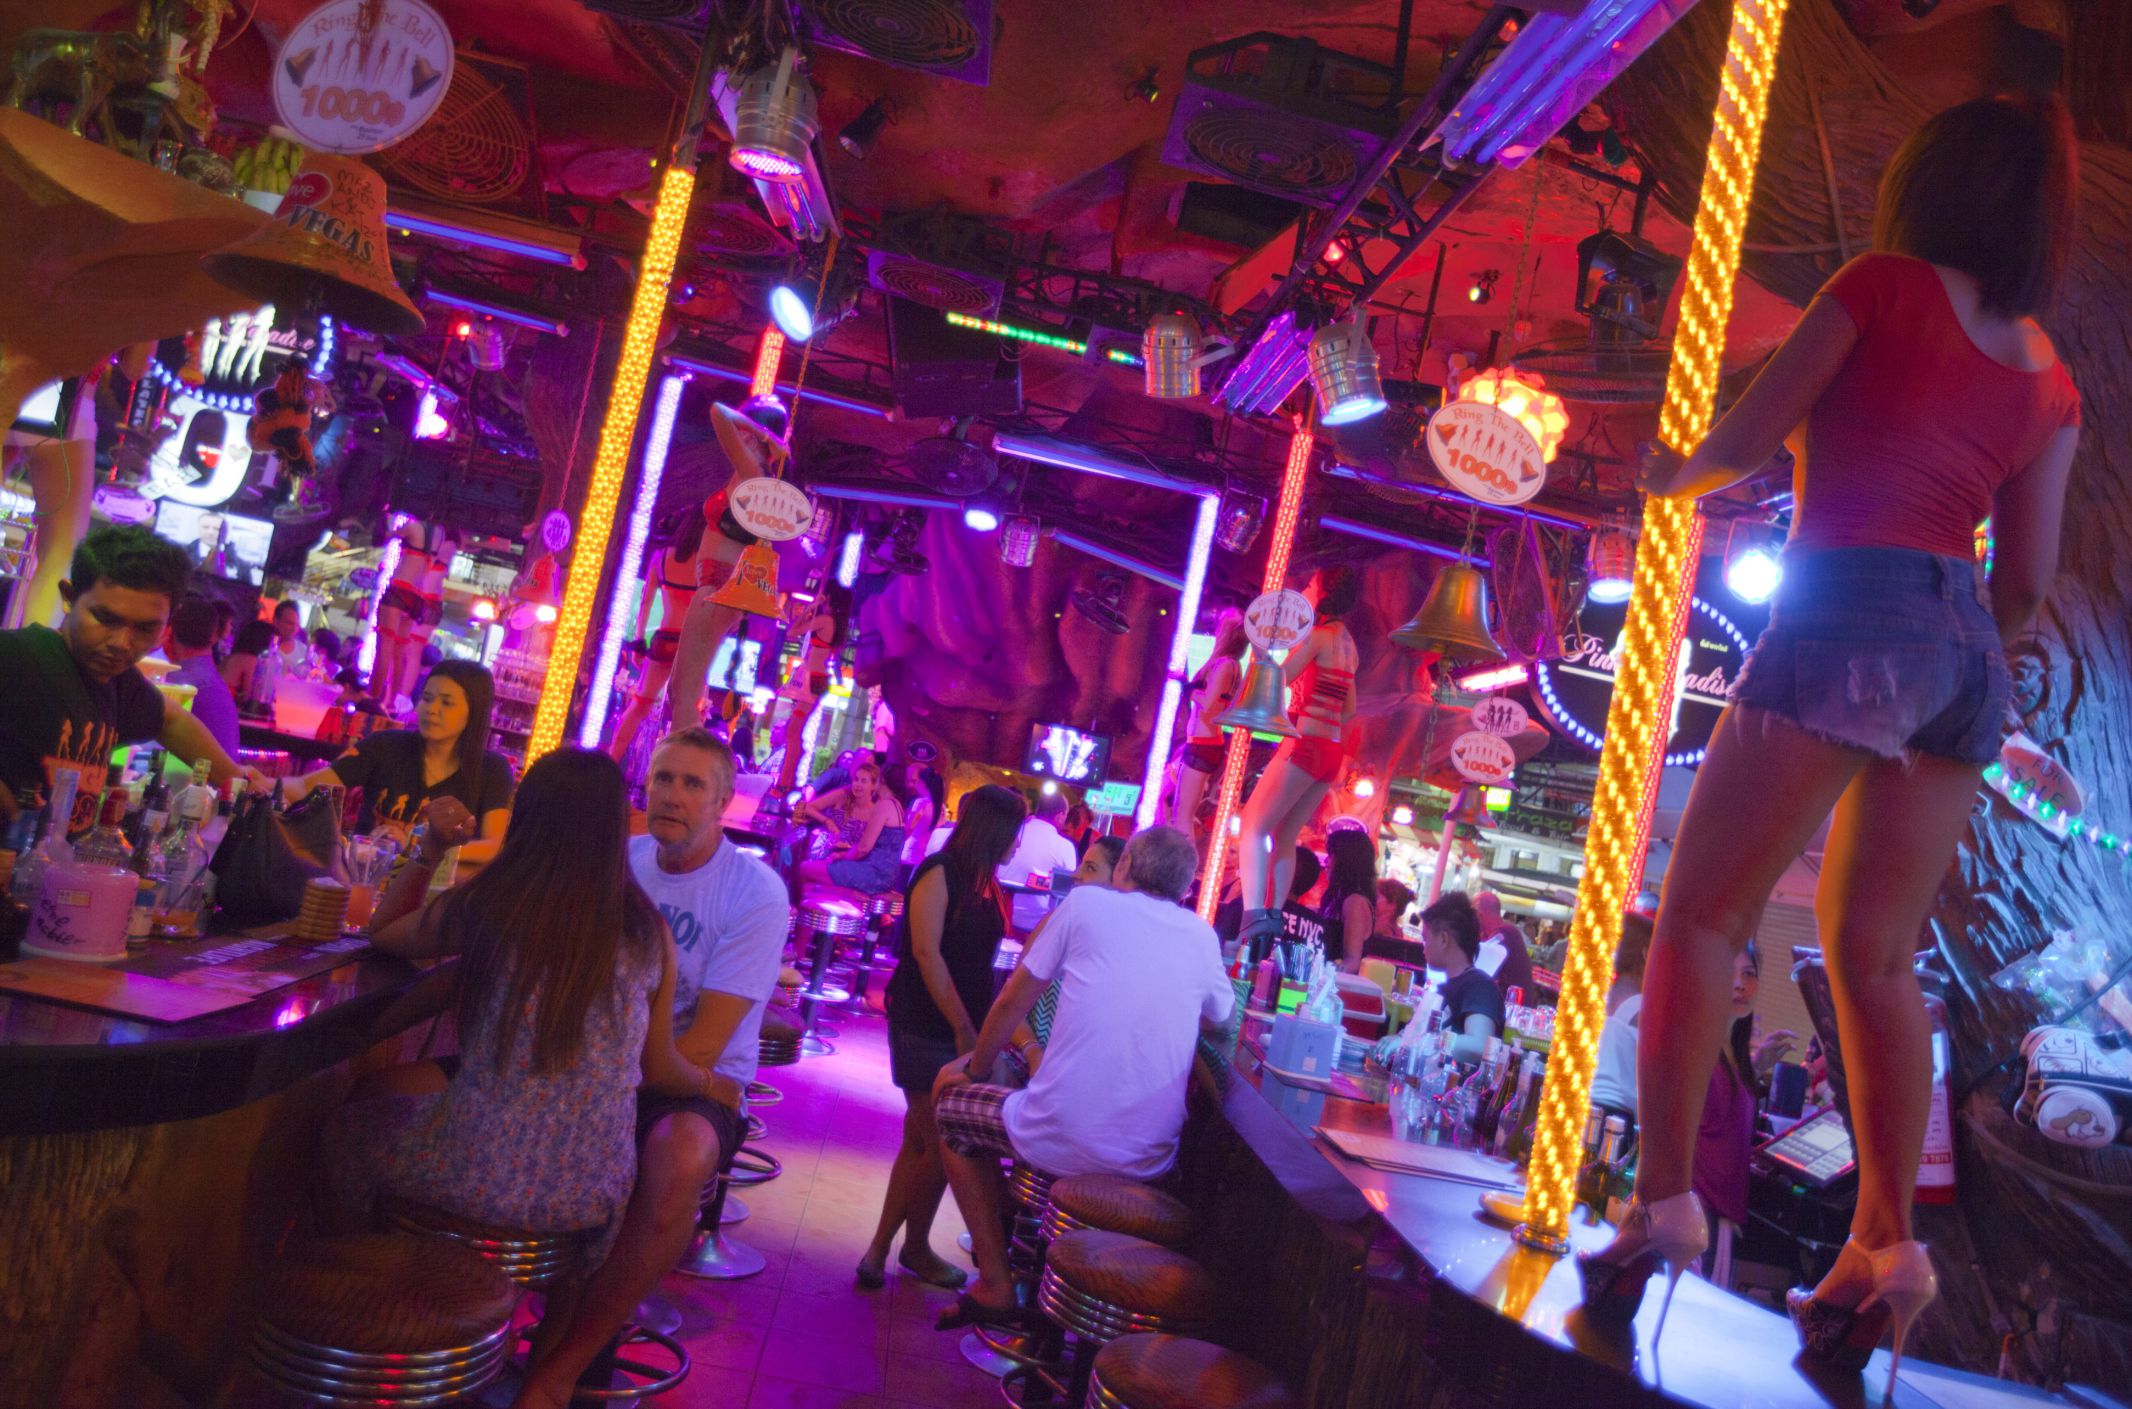 Some of the most popular strip clubs around the world.